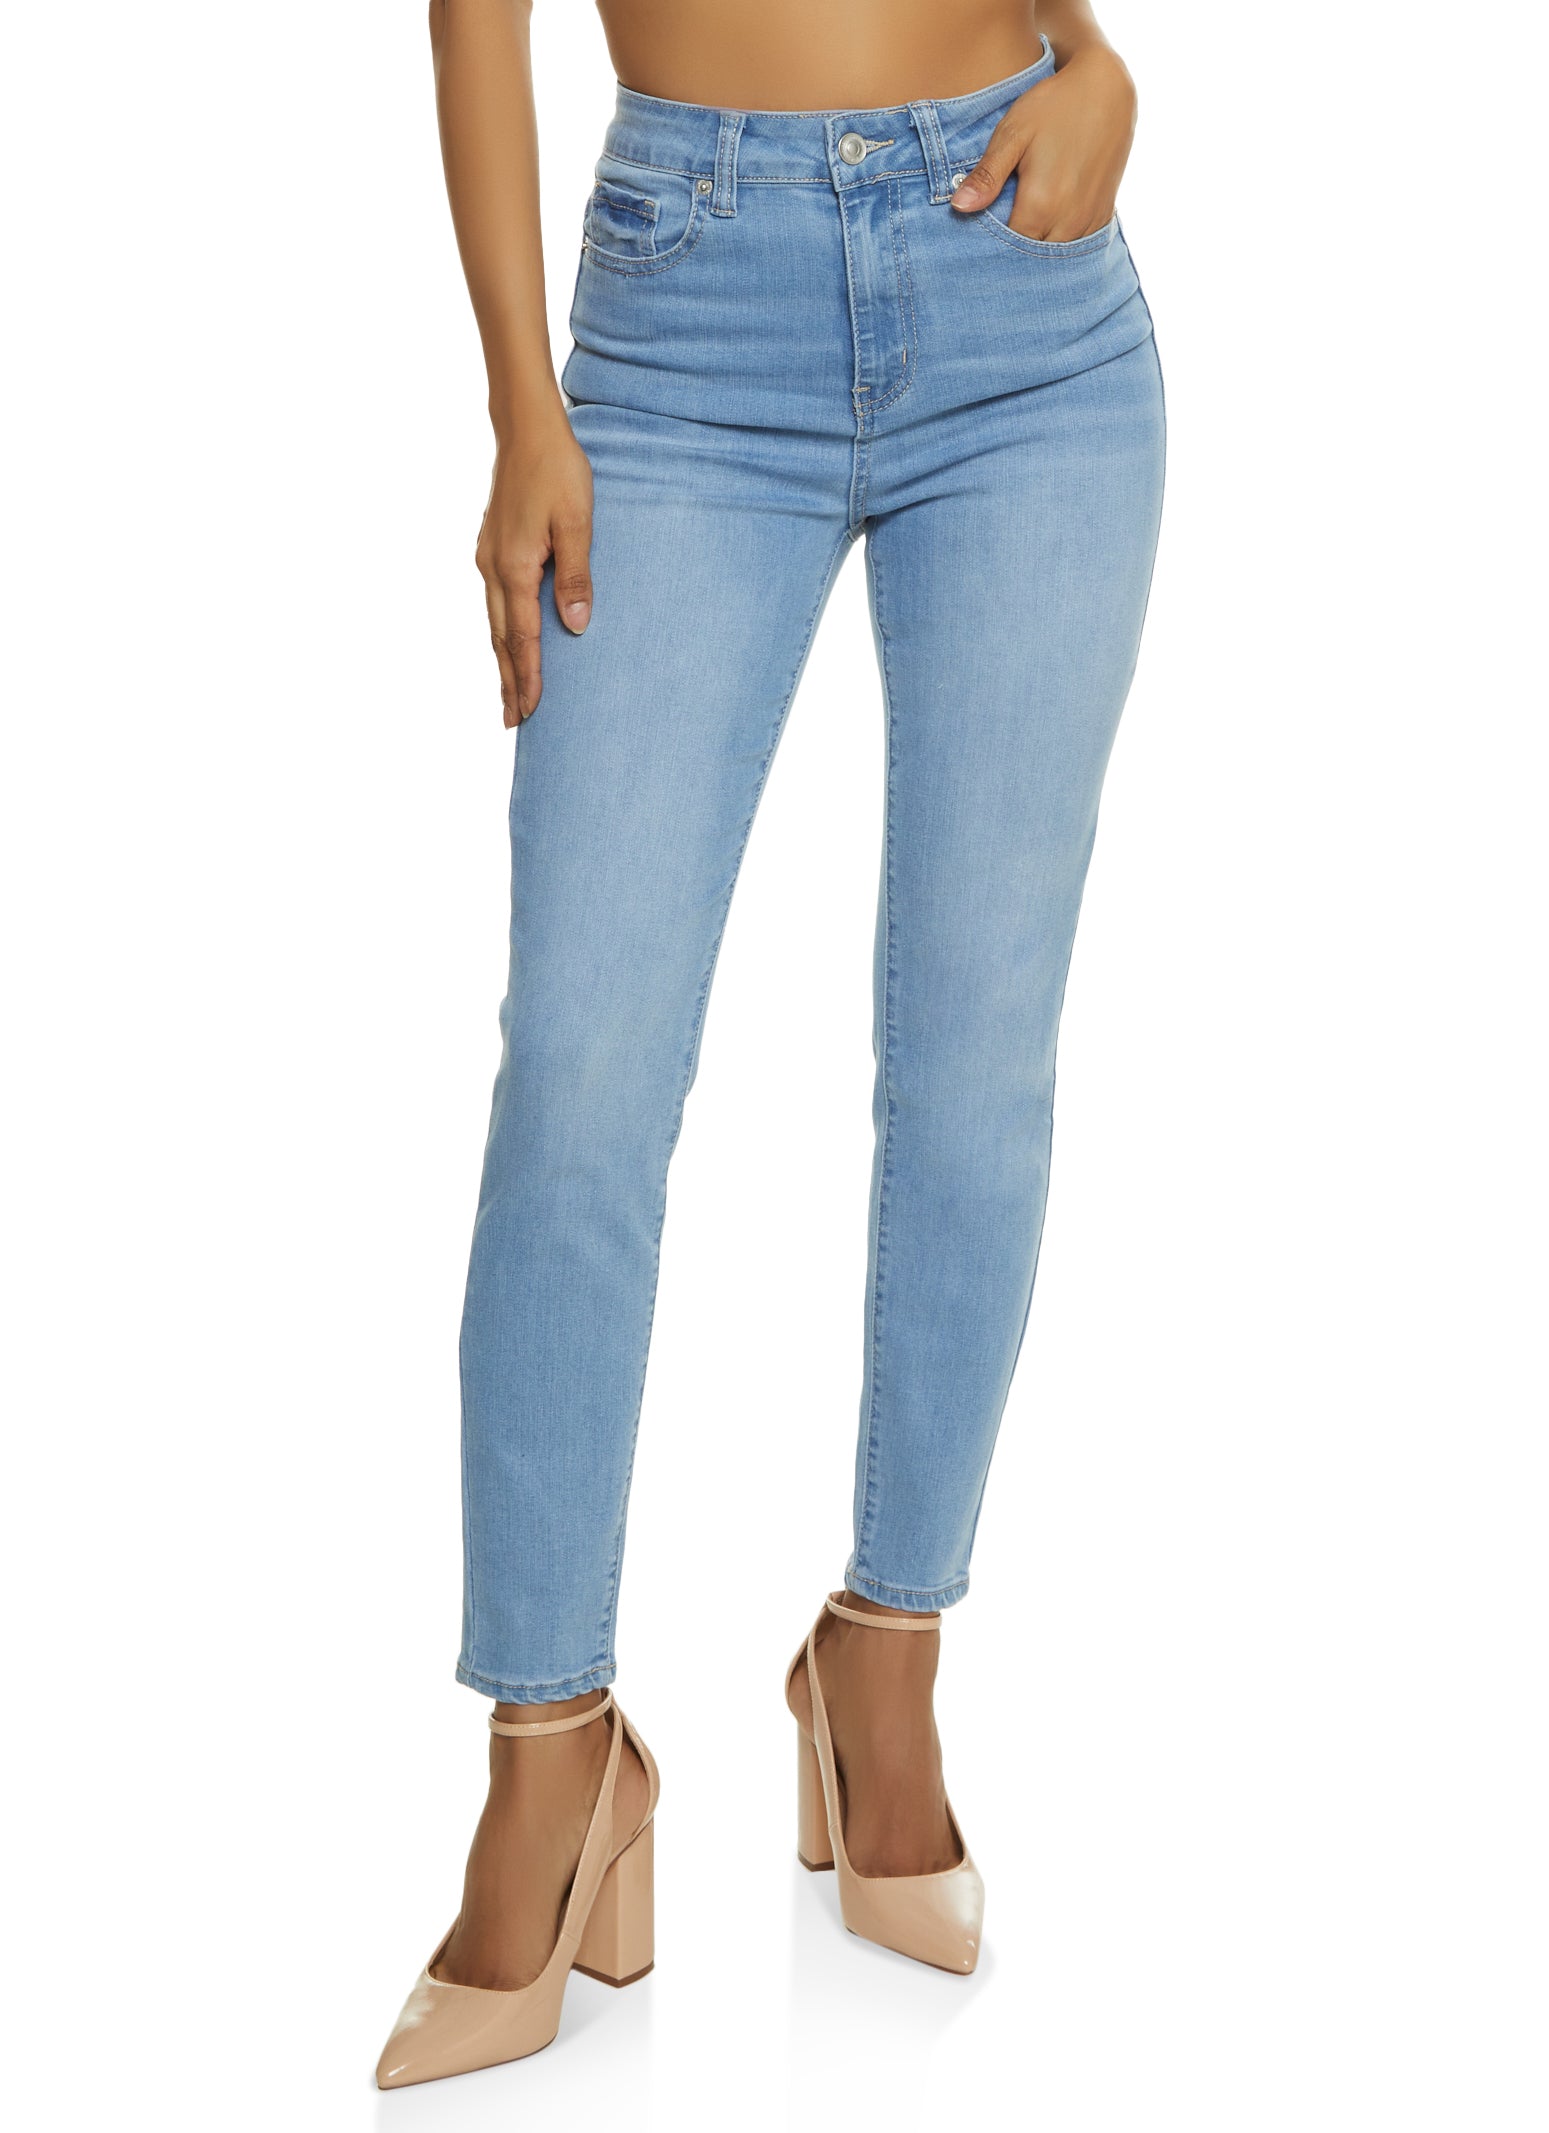 Womens High Waisted Jeans, Everyday Low Prices